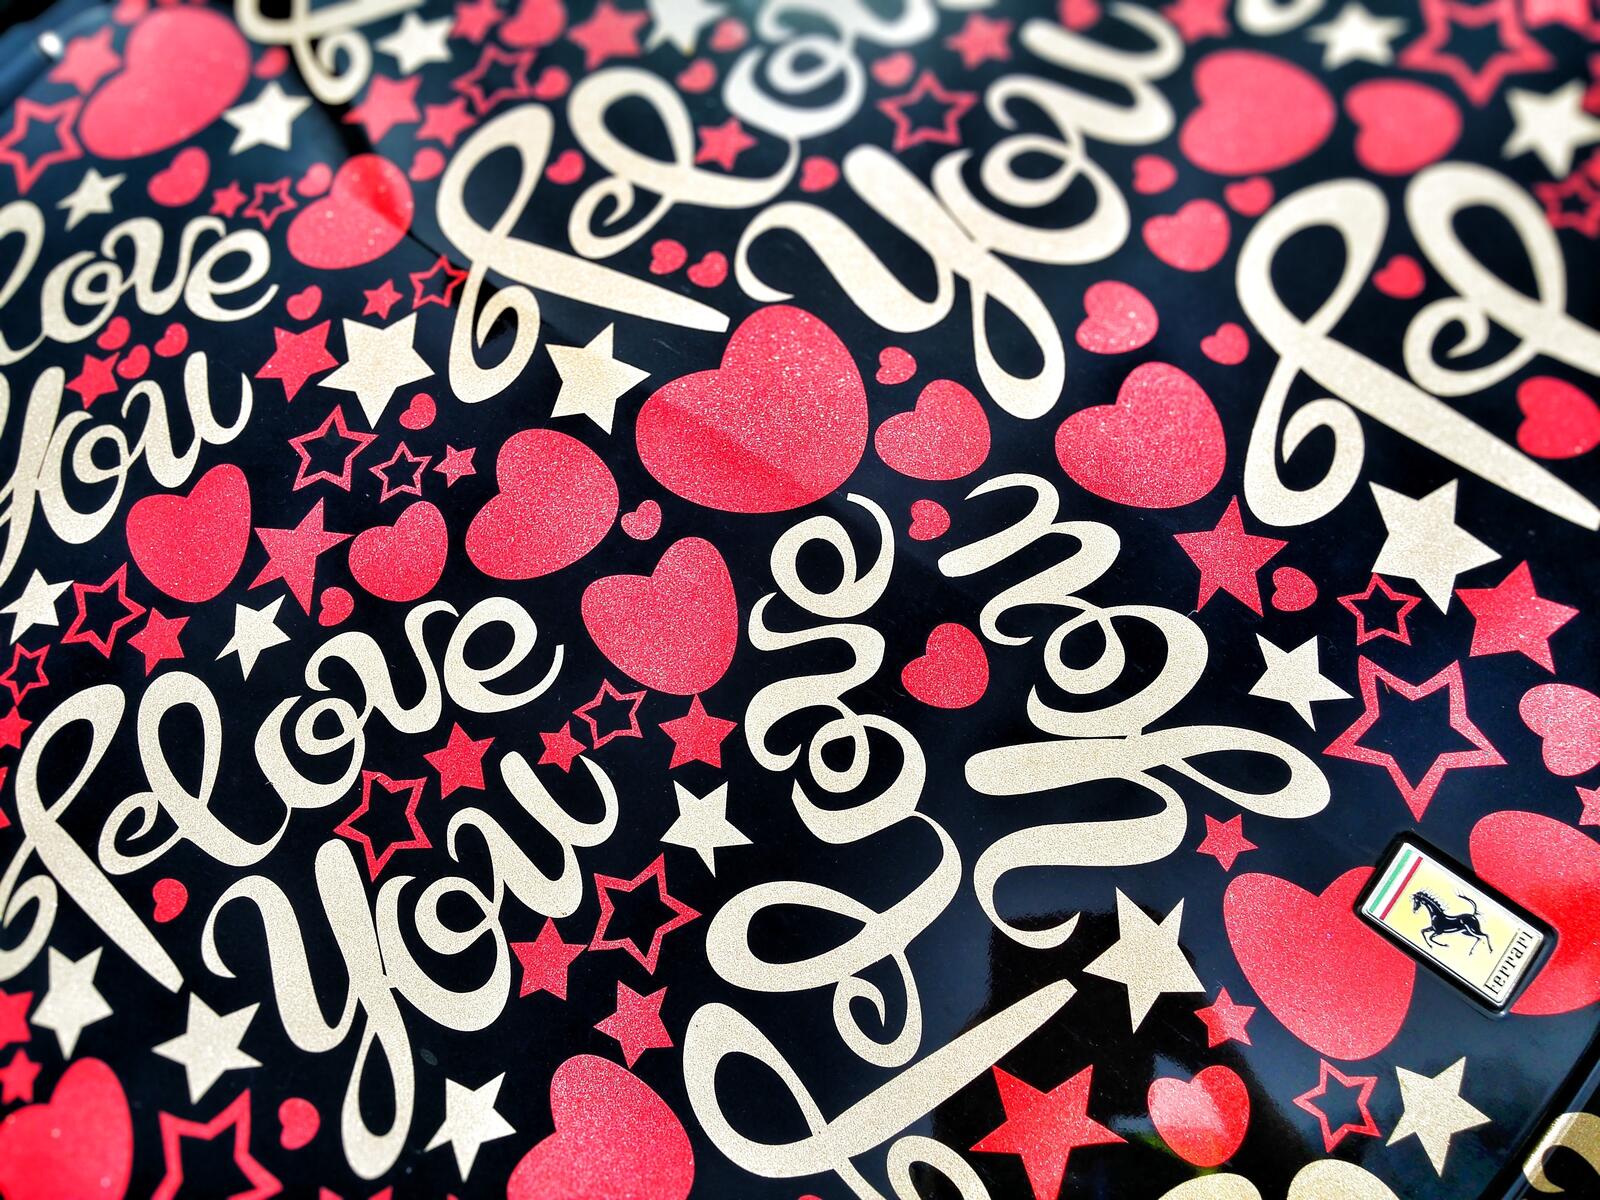 Free photo Stickers I love you with hearts